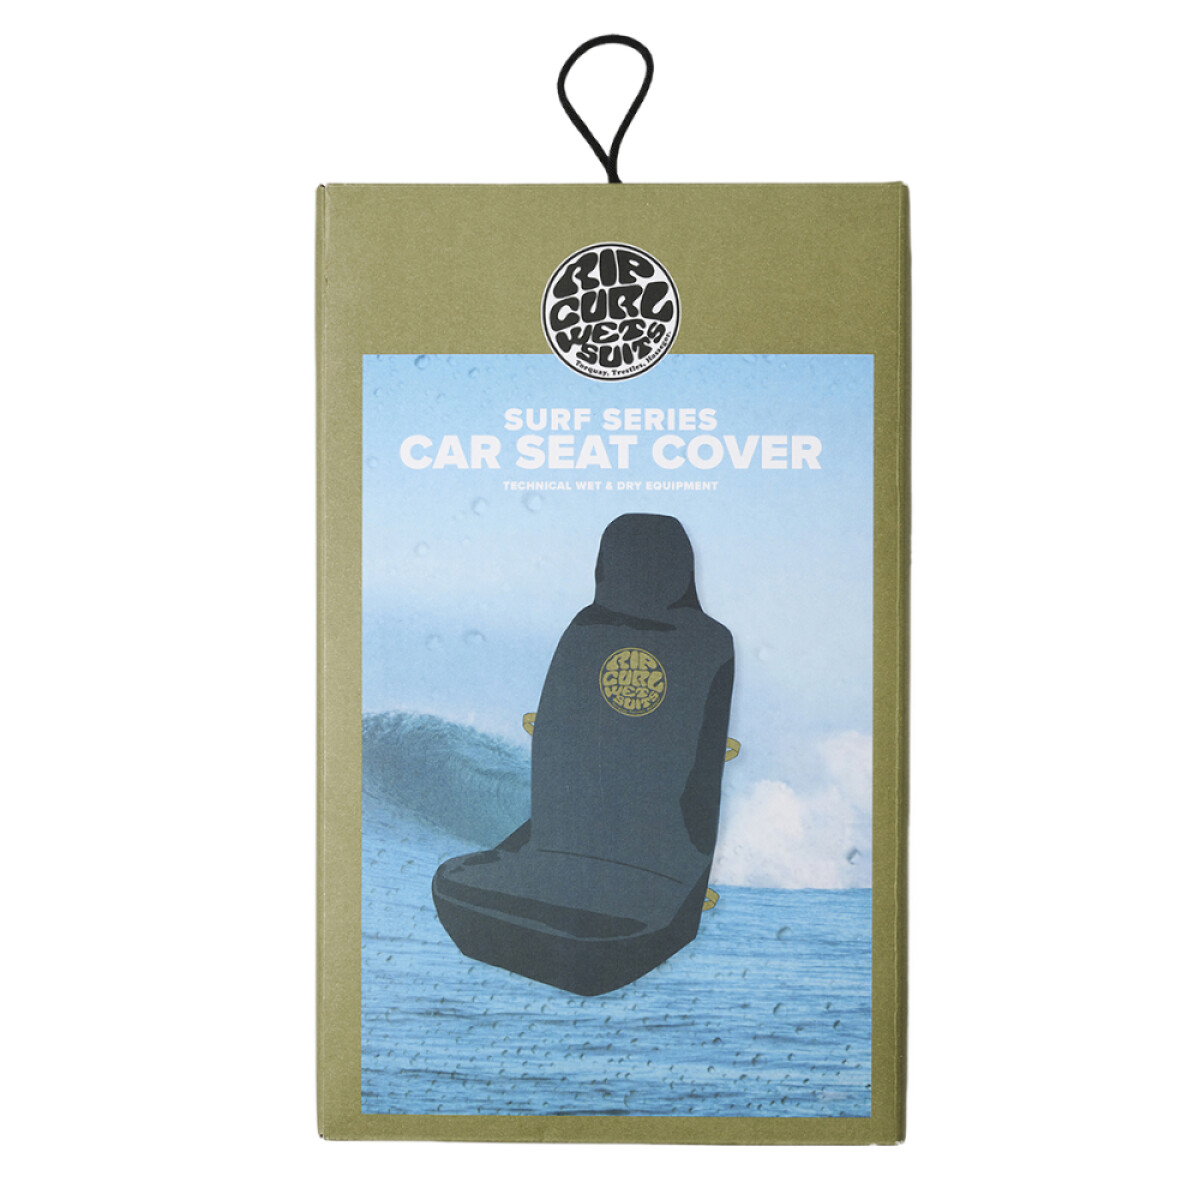 Cubre asiento Rip Curl Surf Series Car Seat Cover - Negro 